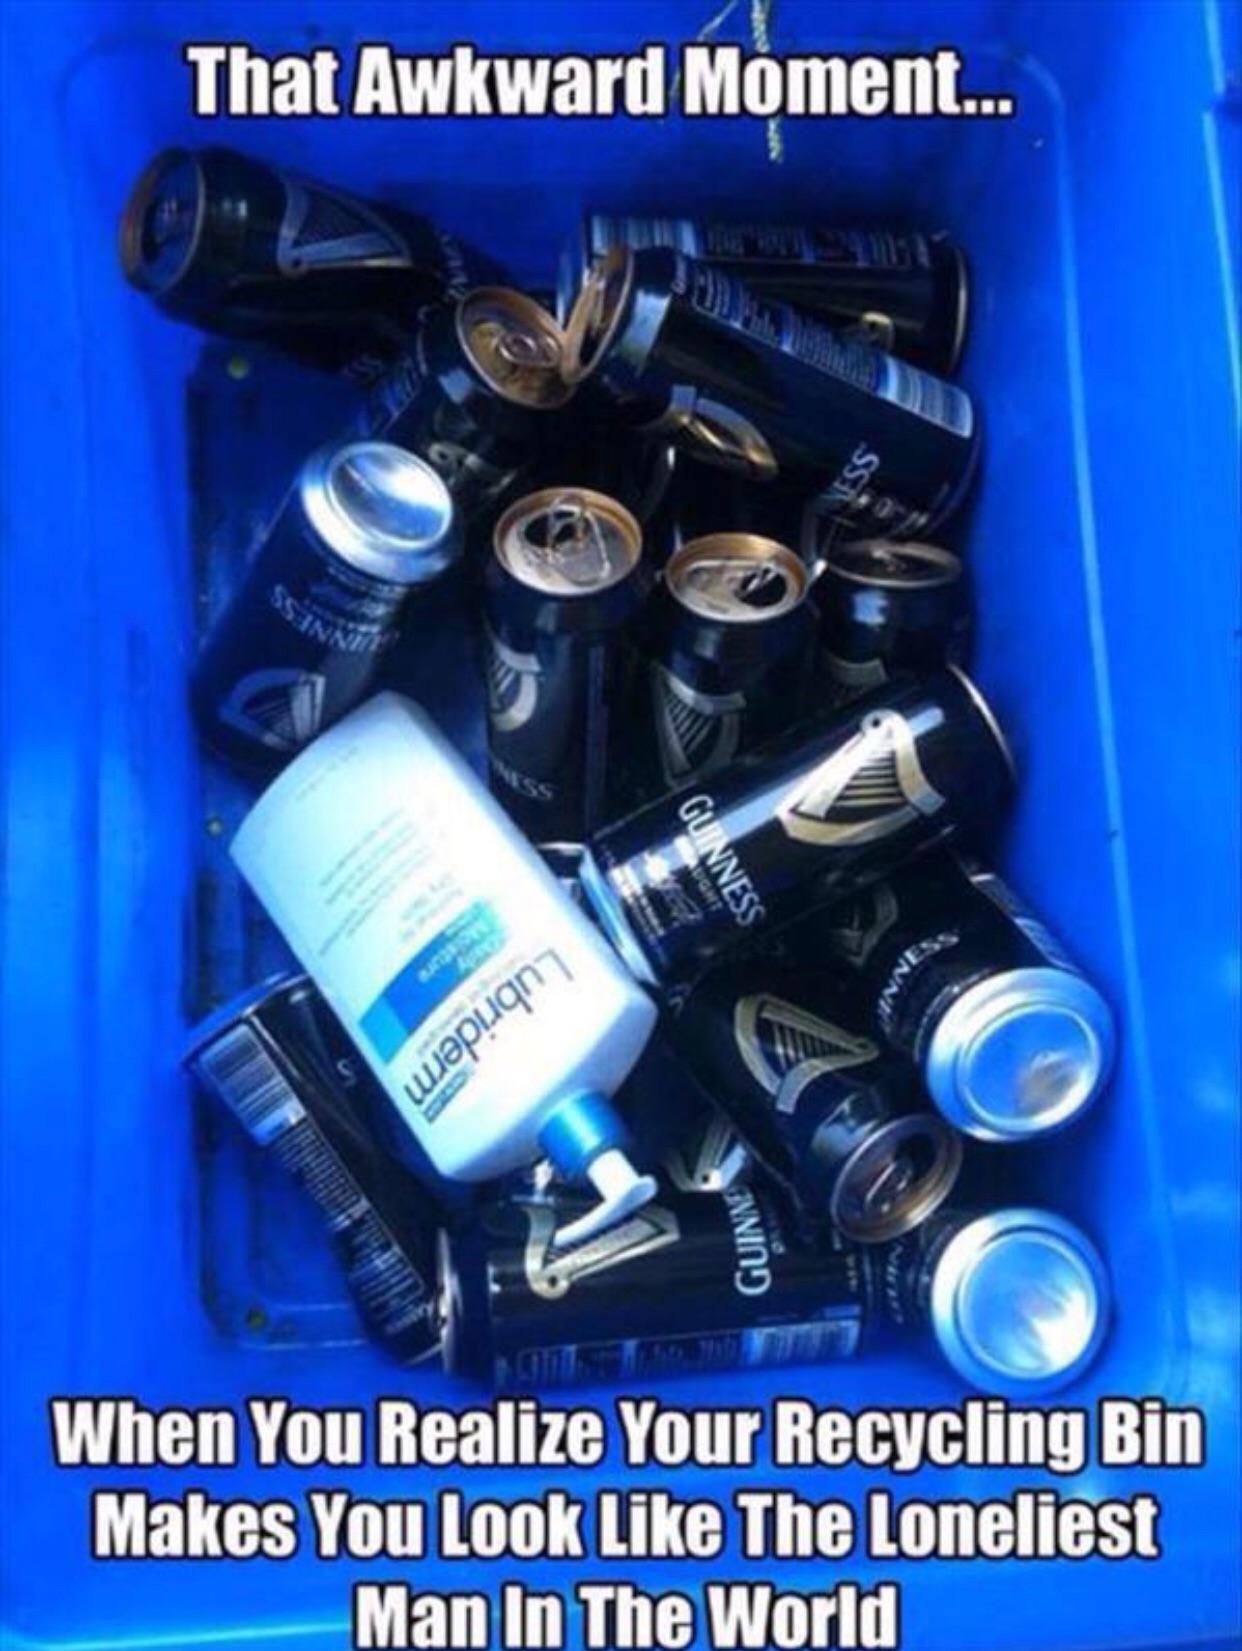 At least I recycle